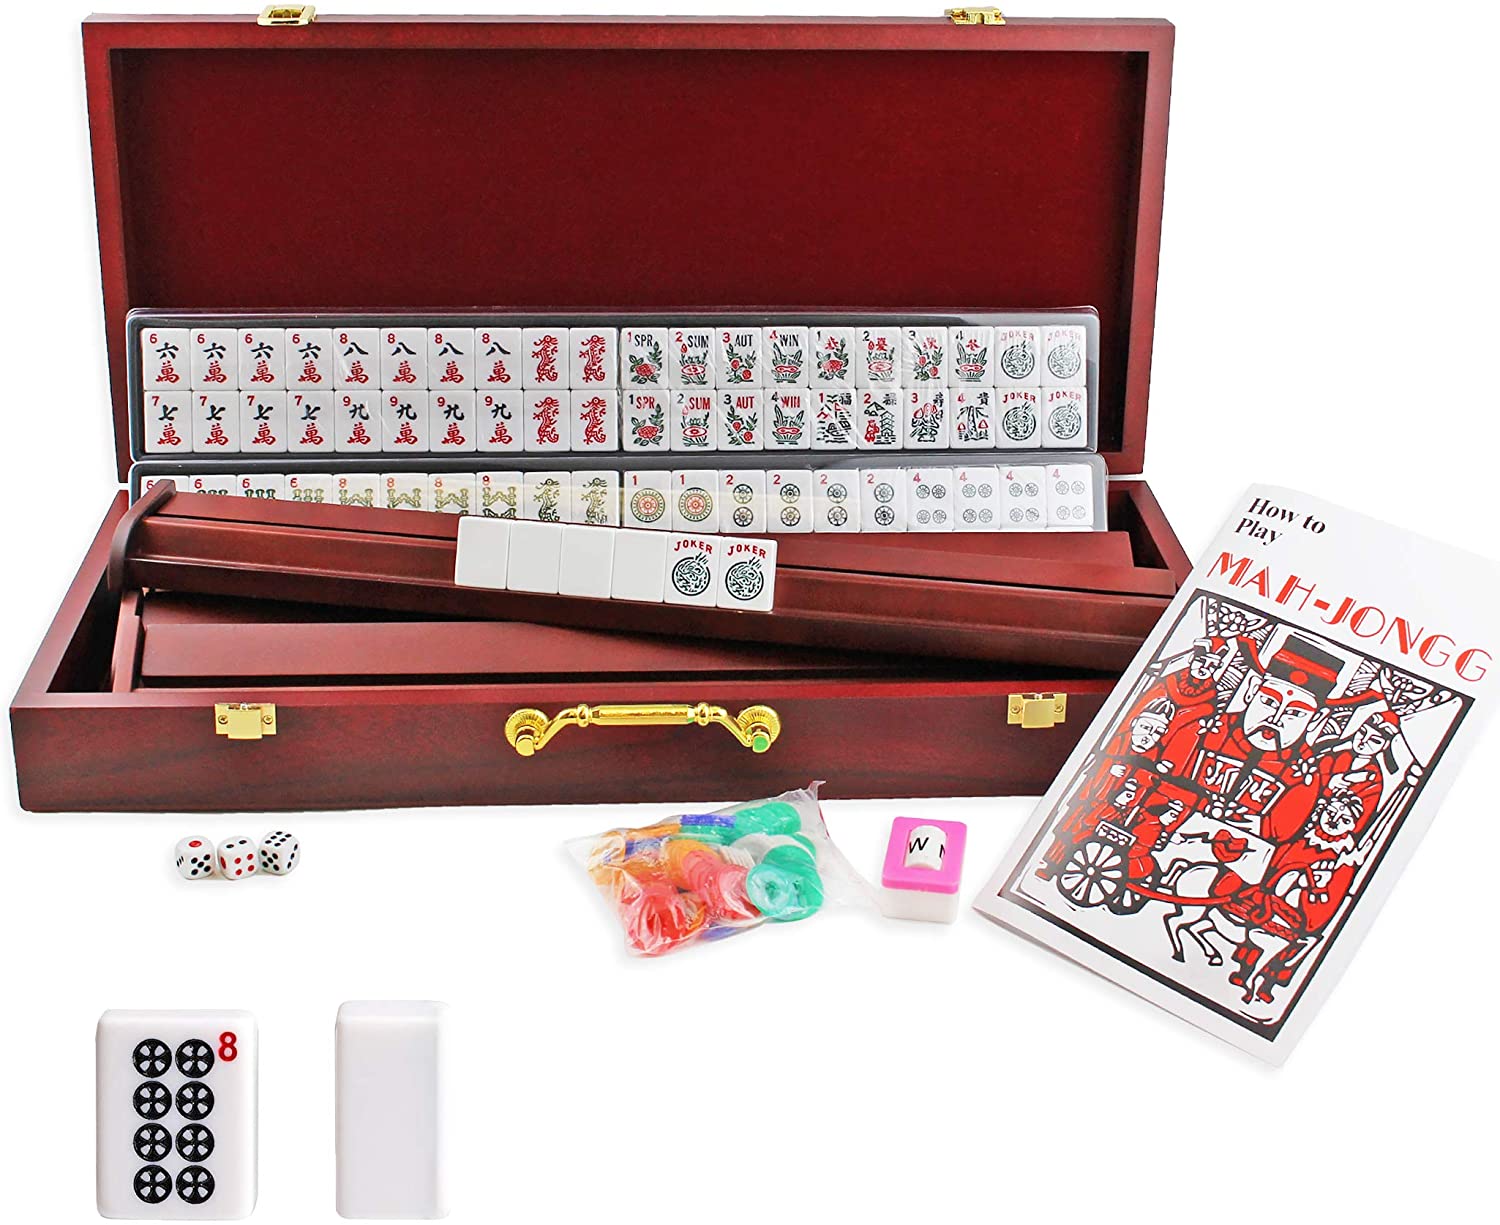 American Mahjong Set ❘ Wooden Case - 4 Wooden Racks & Pushers Included –  USA MJ TABLE 自動麻將桌